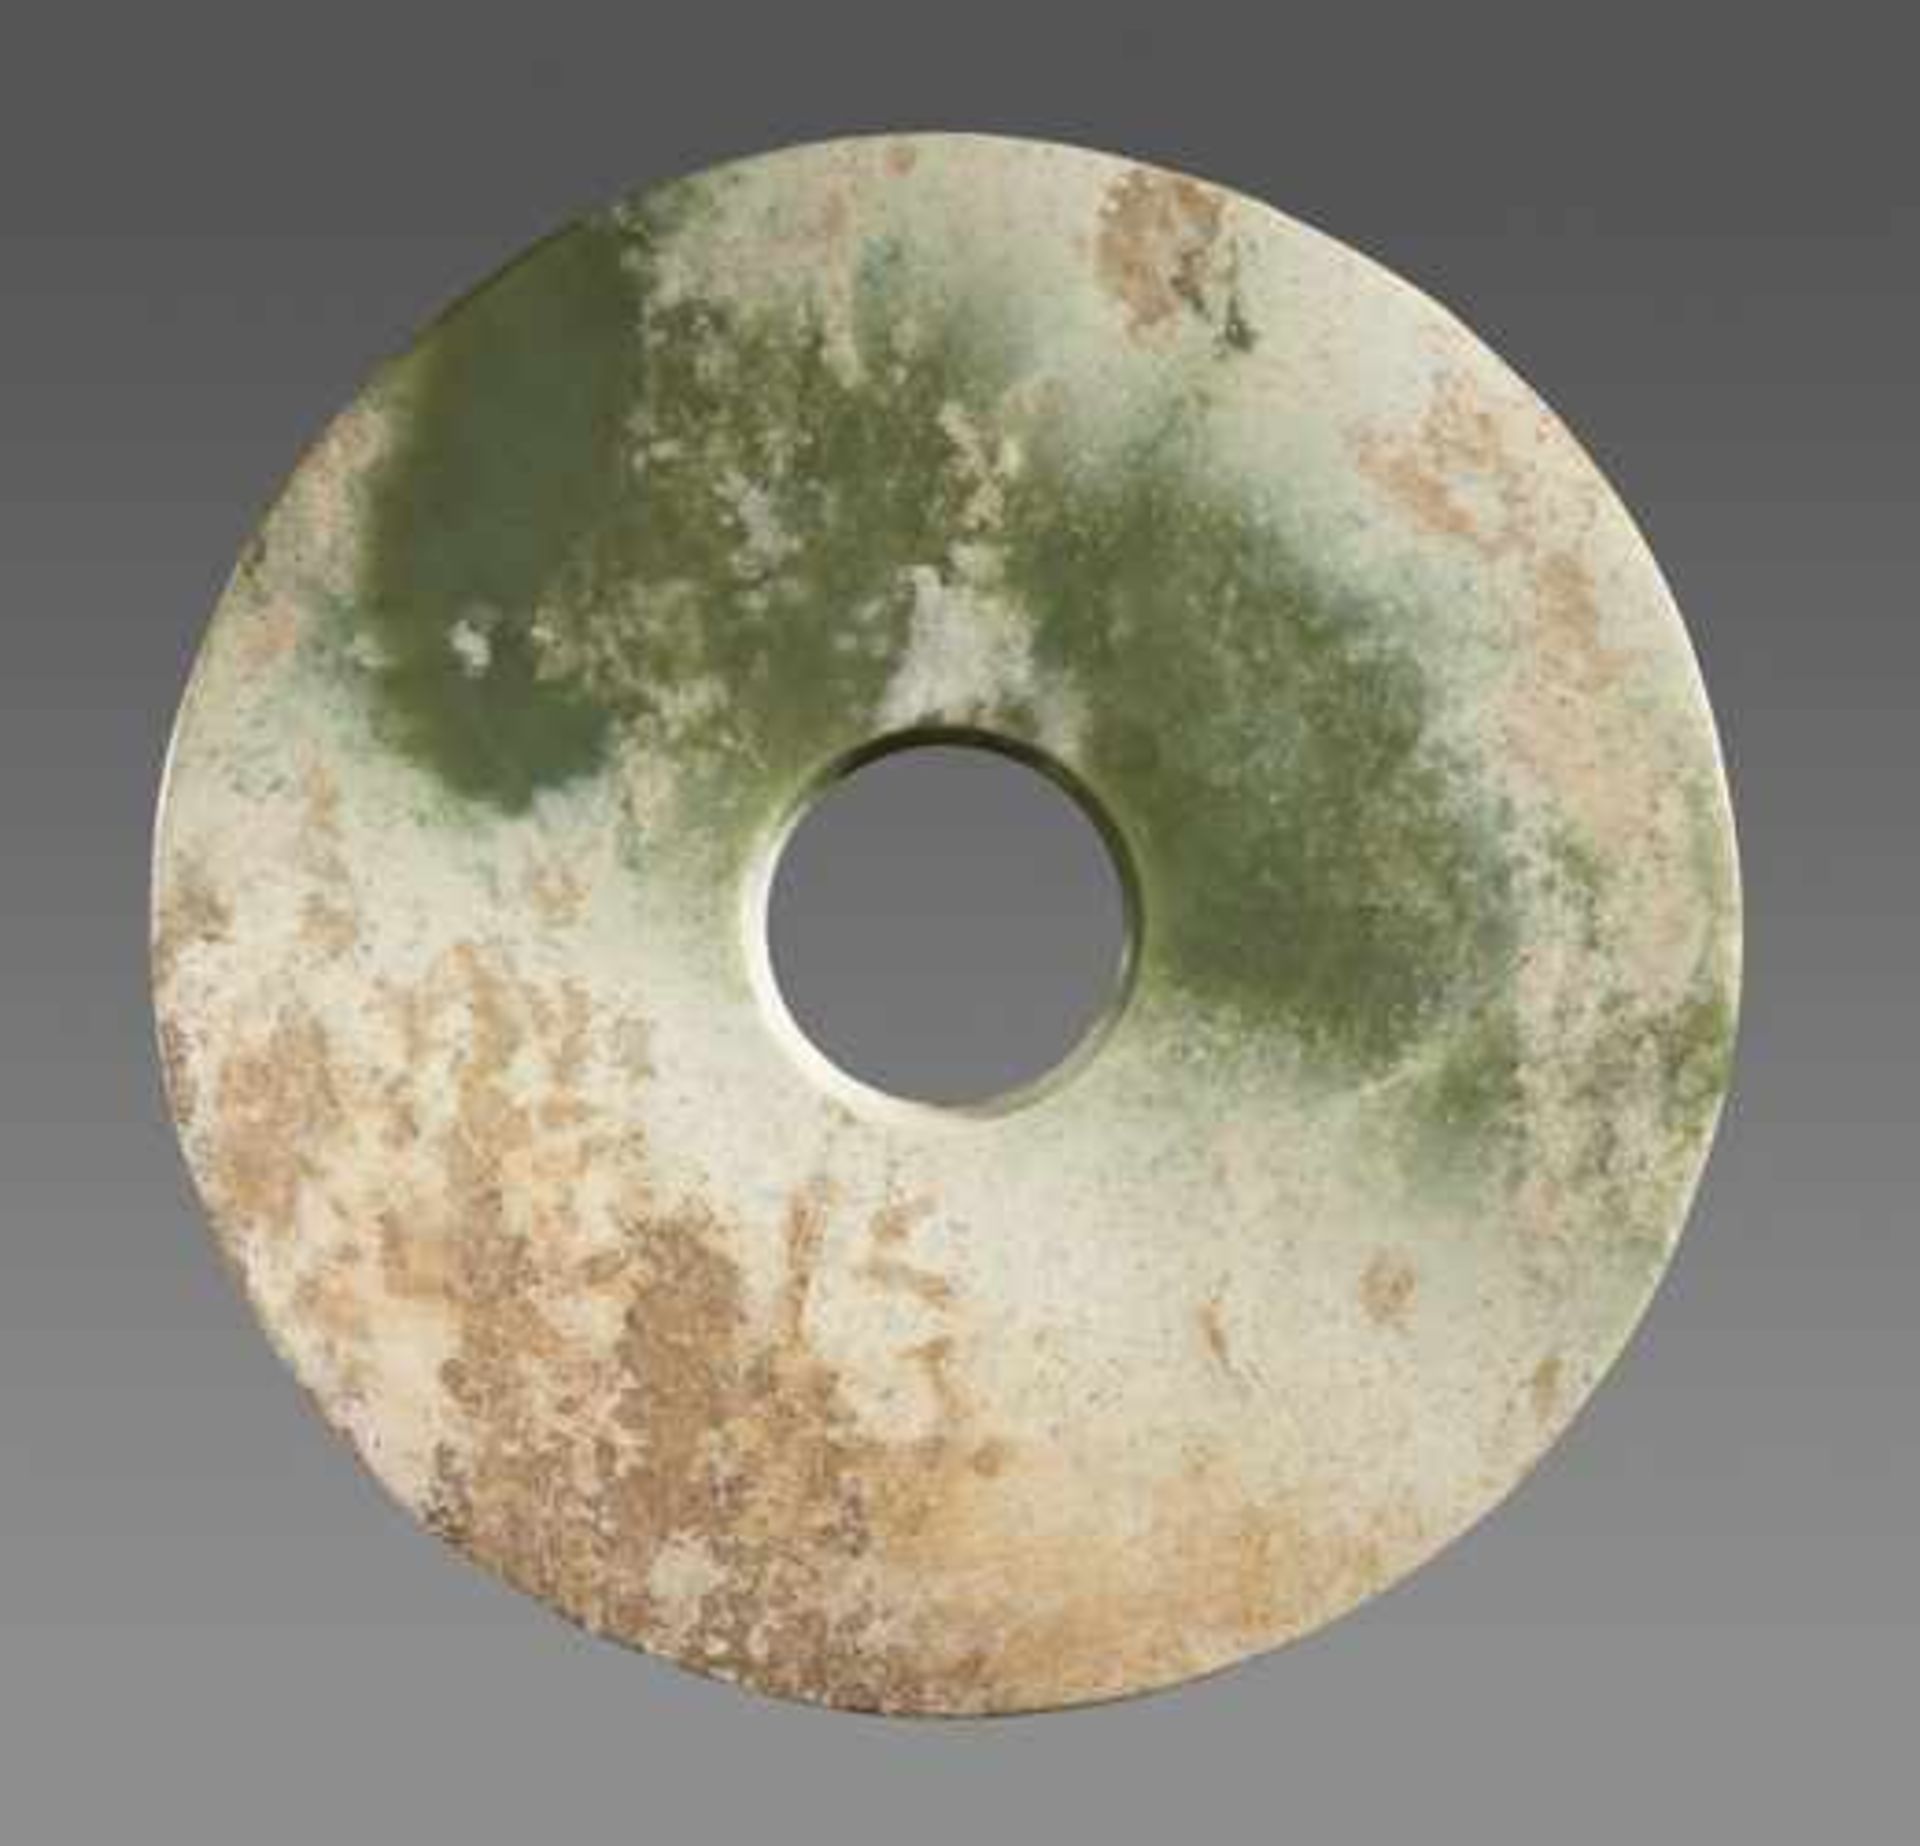 A LARGE SMOOTH BI DISC IN GREEN JADE WITH WHITENED AREAS Jade, China. Early Bronze Age, c. 2200-1600